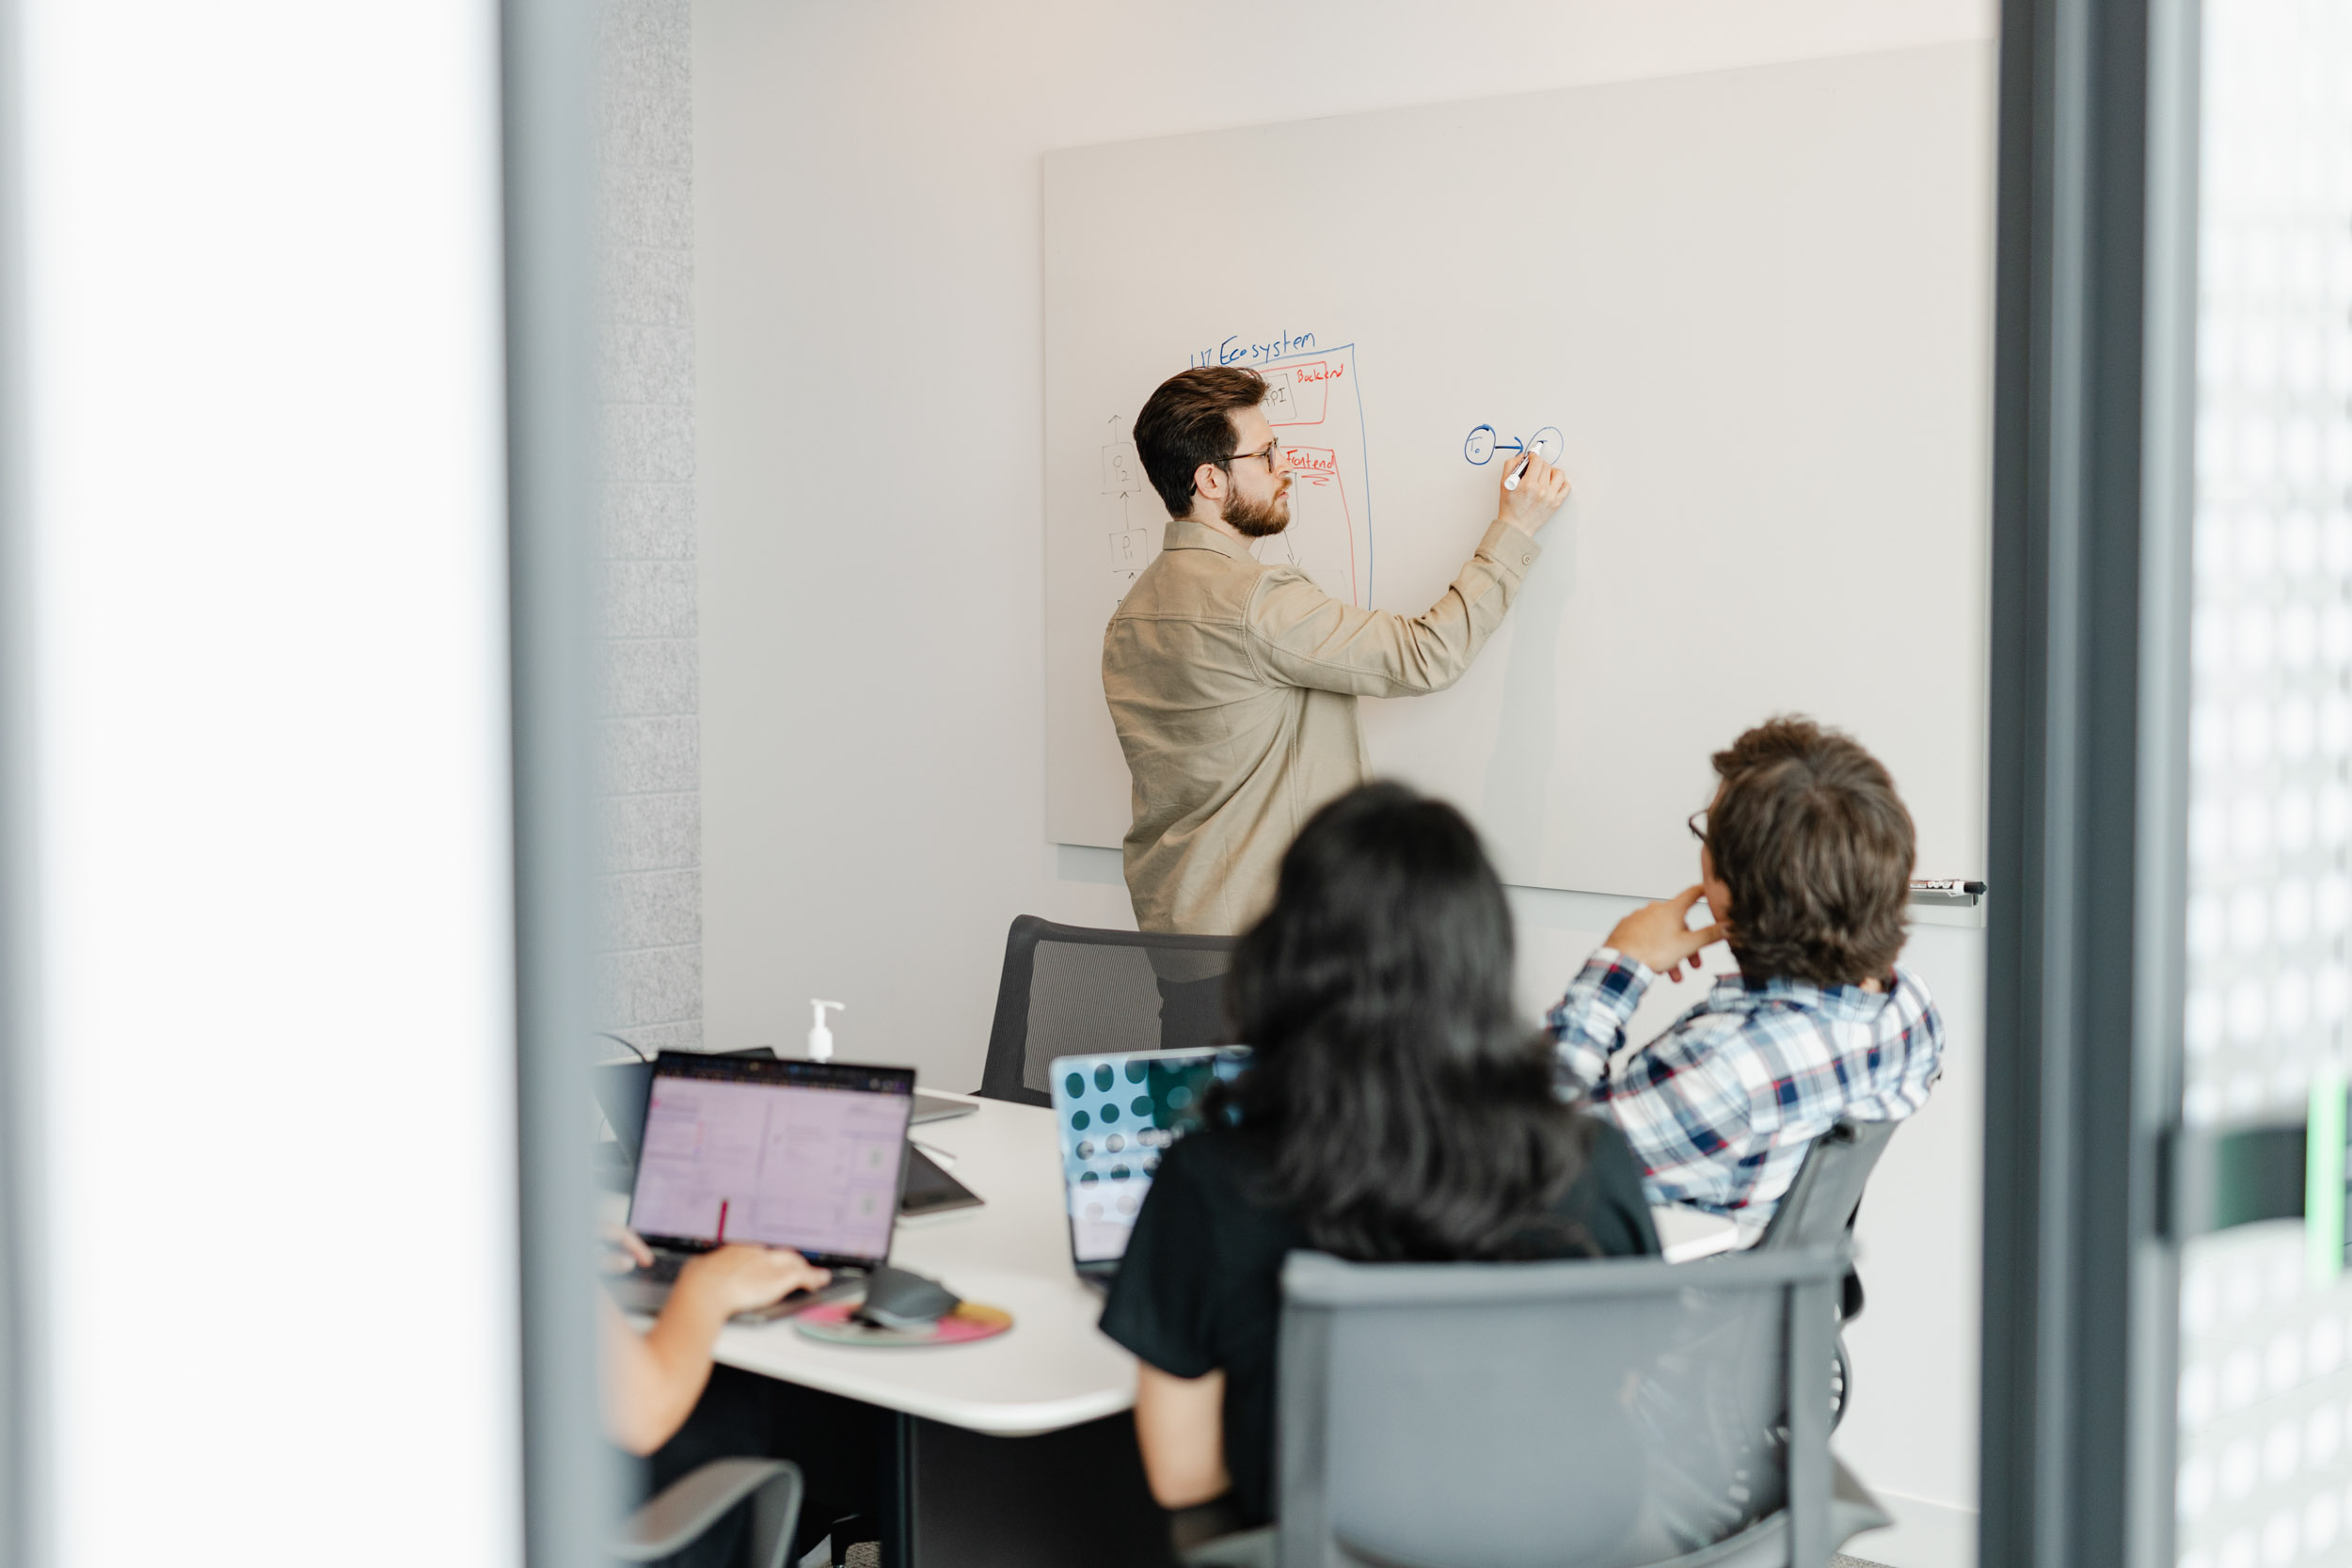 A group of people in a conference room collaborating around a whiteboard.